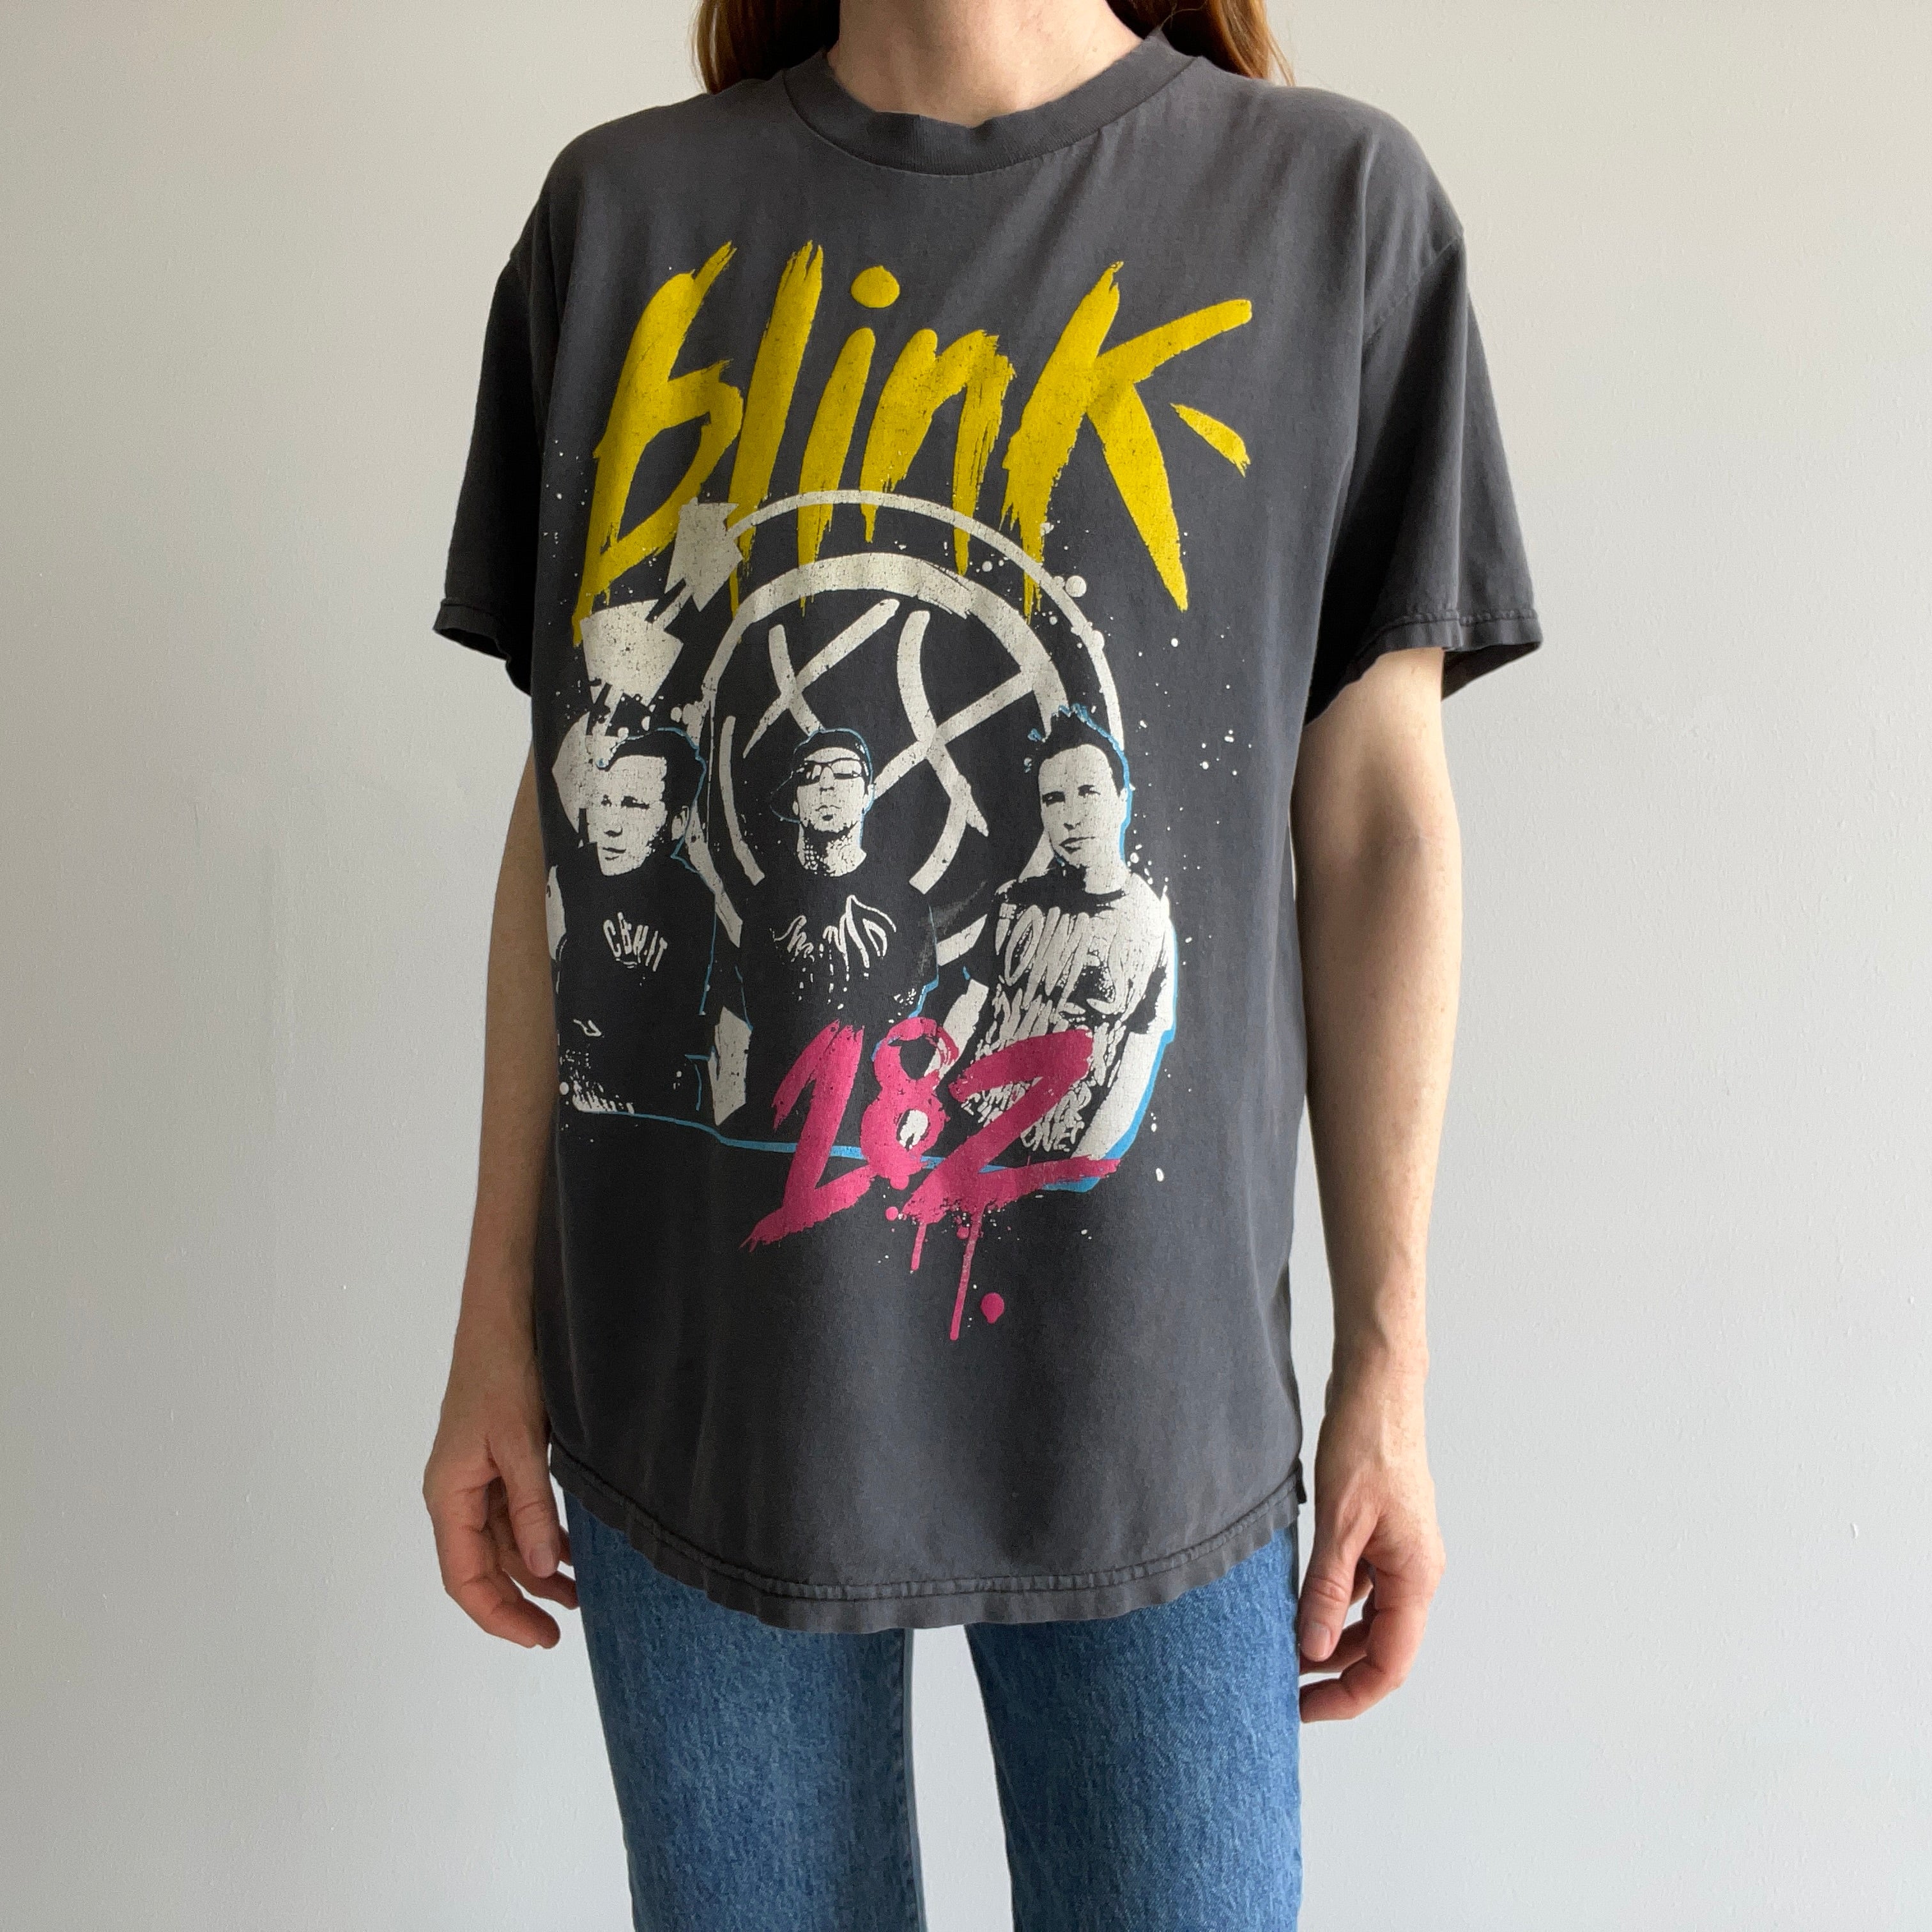 2009 Blink 192 Shredded and Worn Front and Back T-Shirt